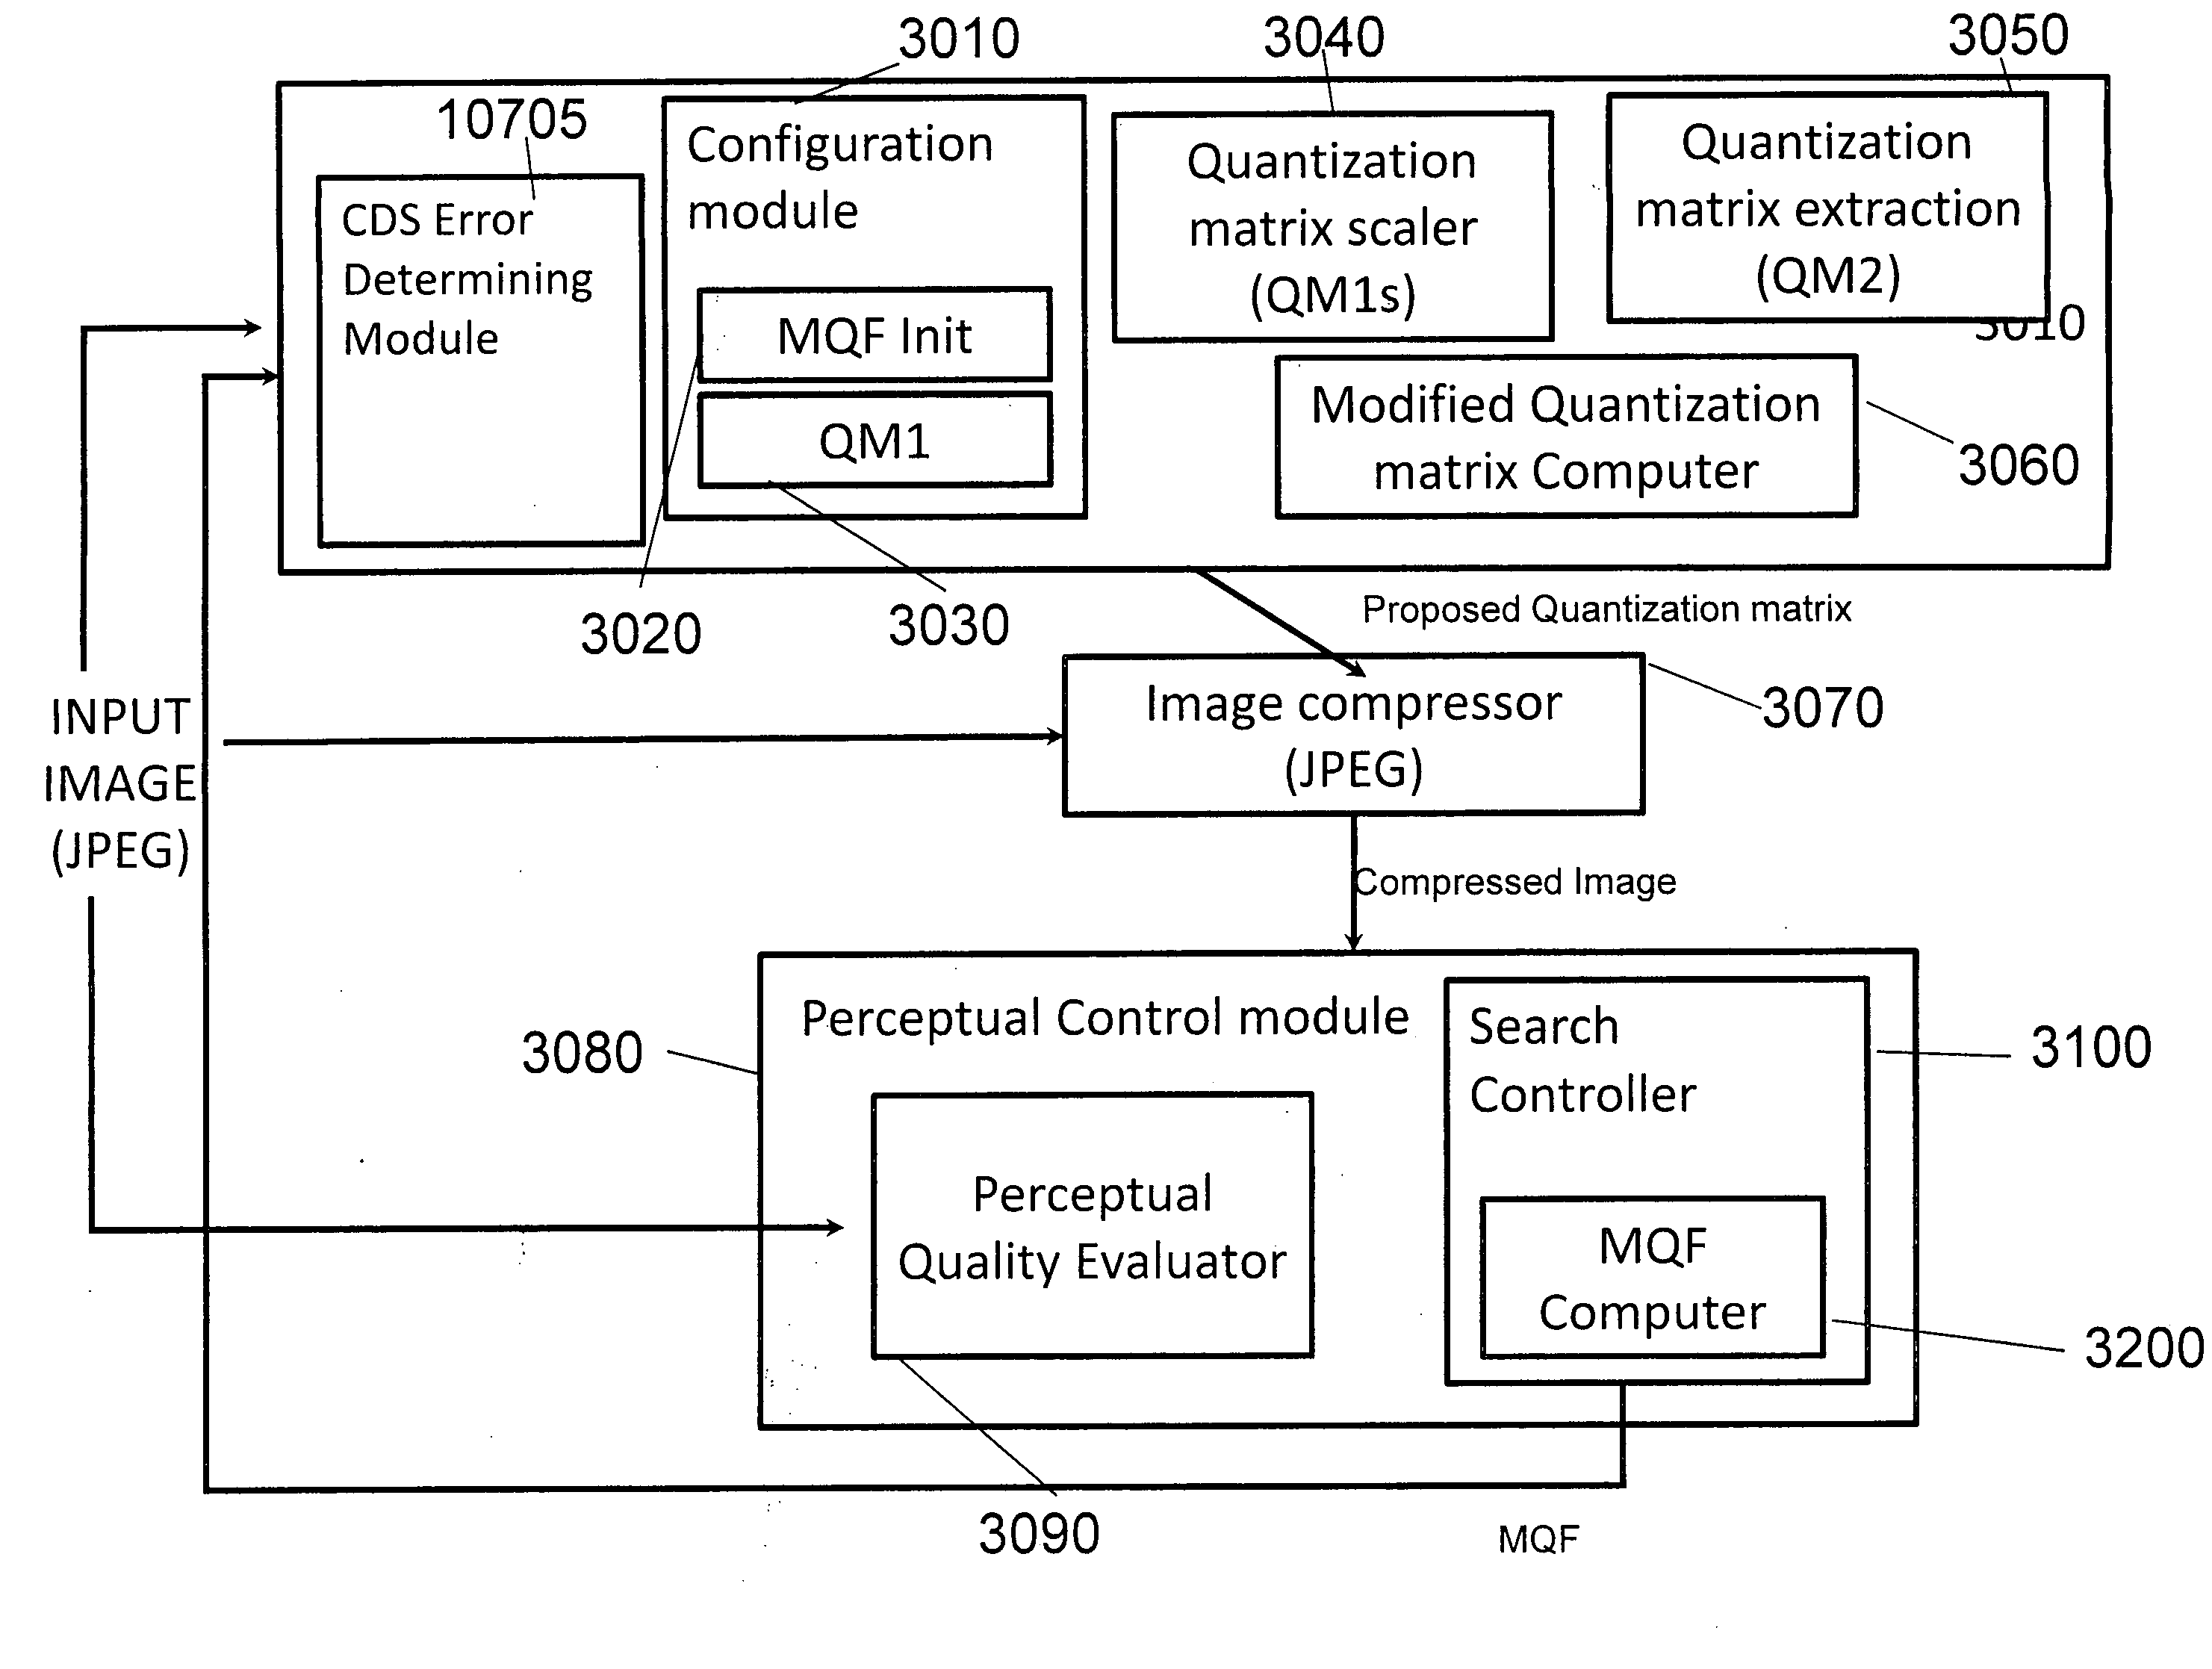 Apparatus and methods for recompression of digital images